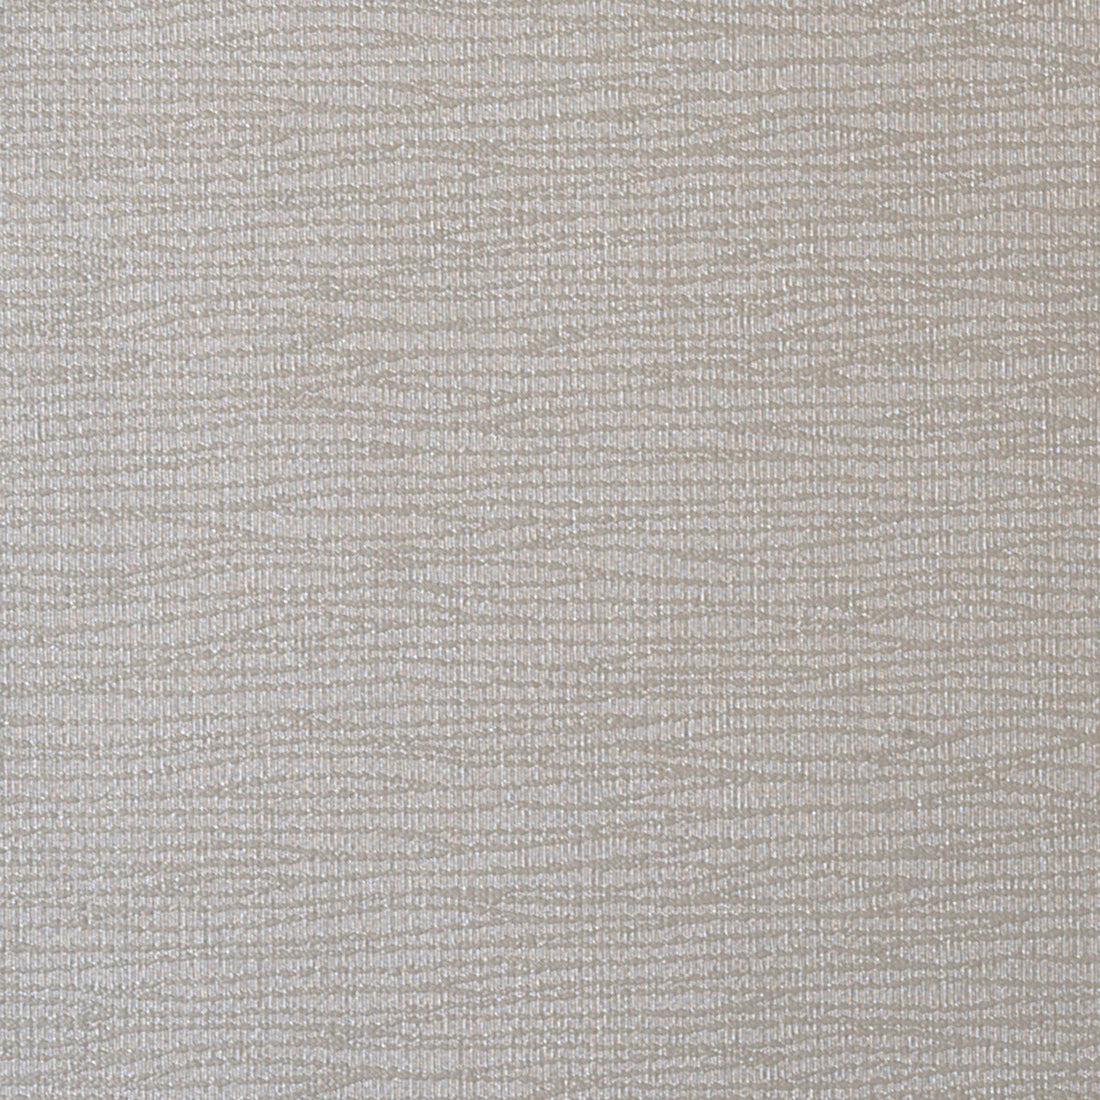 Seismic fabric in nickel color - pattern SEISMIC.11.0 - by Kravet Contract in the Sta-Kleen collection